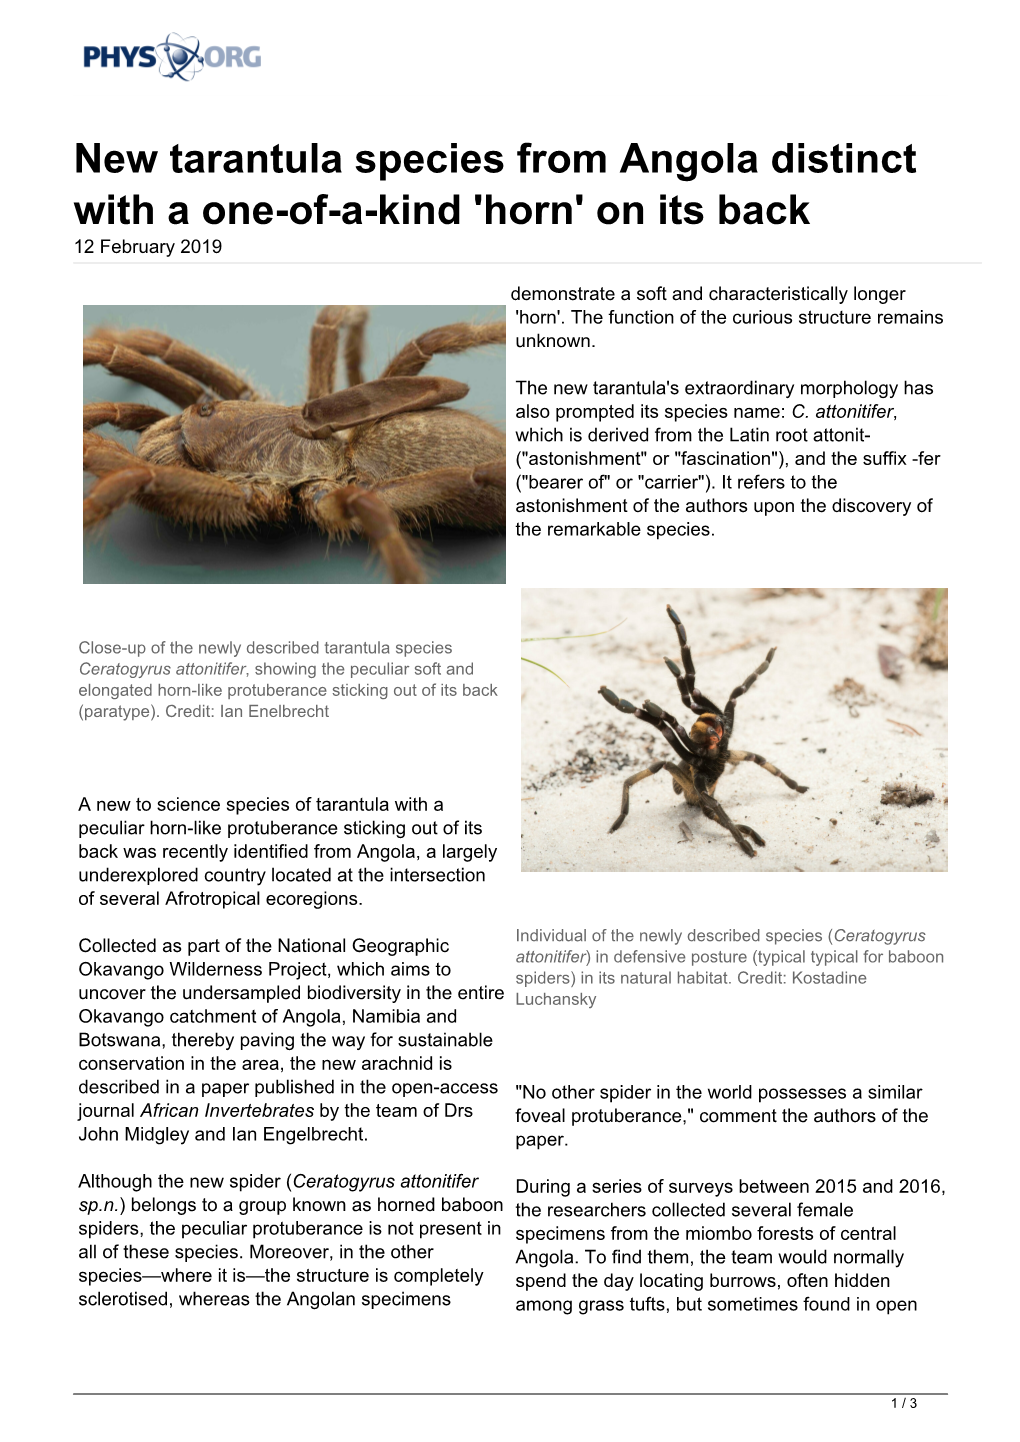 New Tarantula Species from Angola Distinct with a One-Of-A-Kind 'Horn' on Its Back 12 February 2019